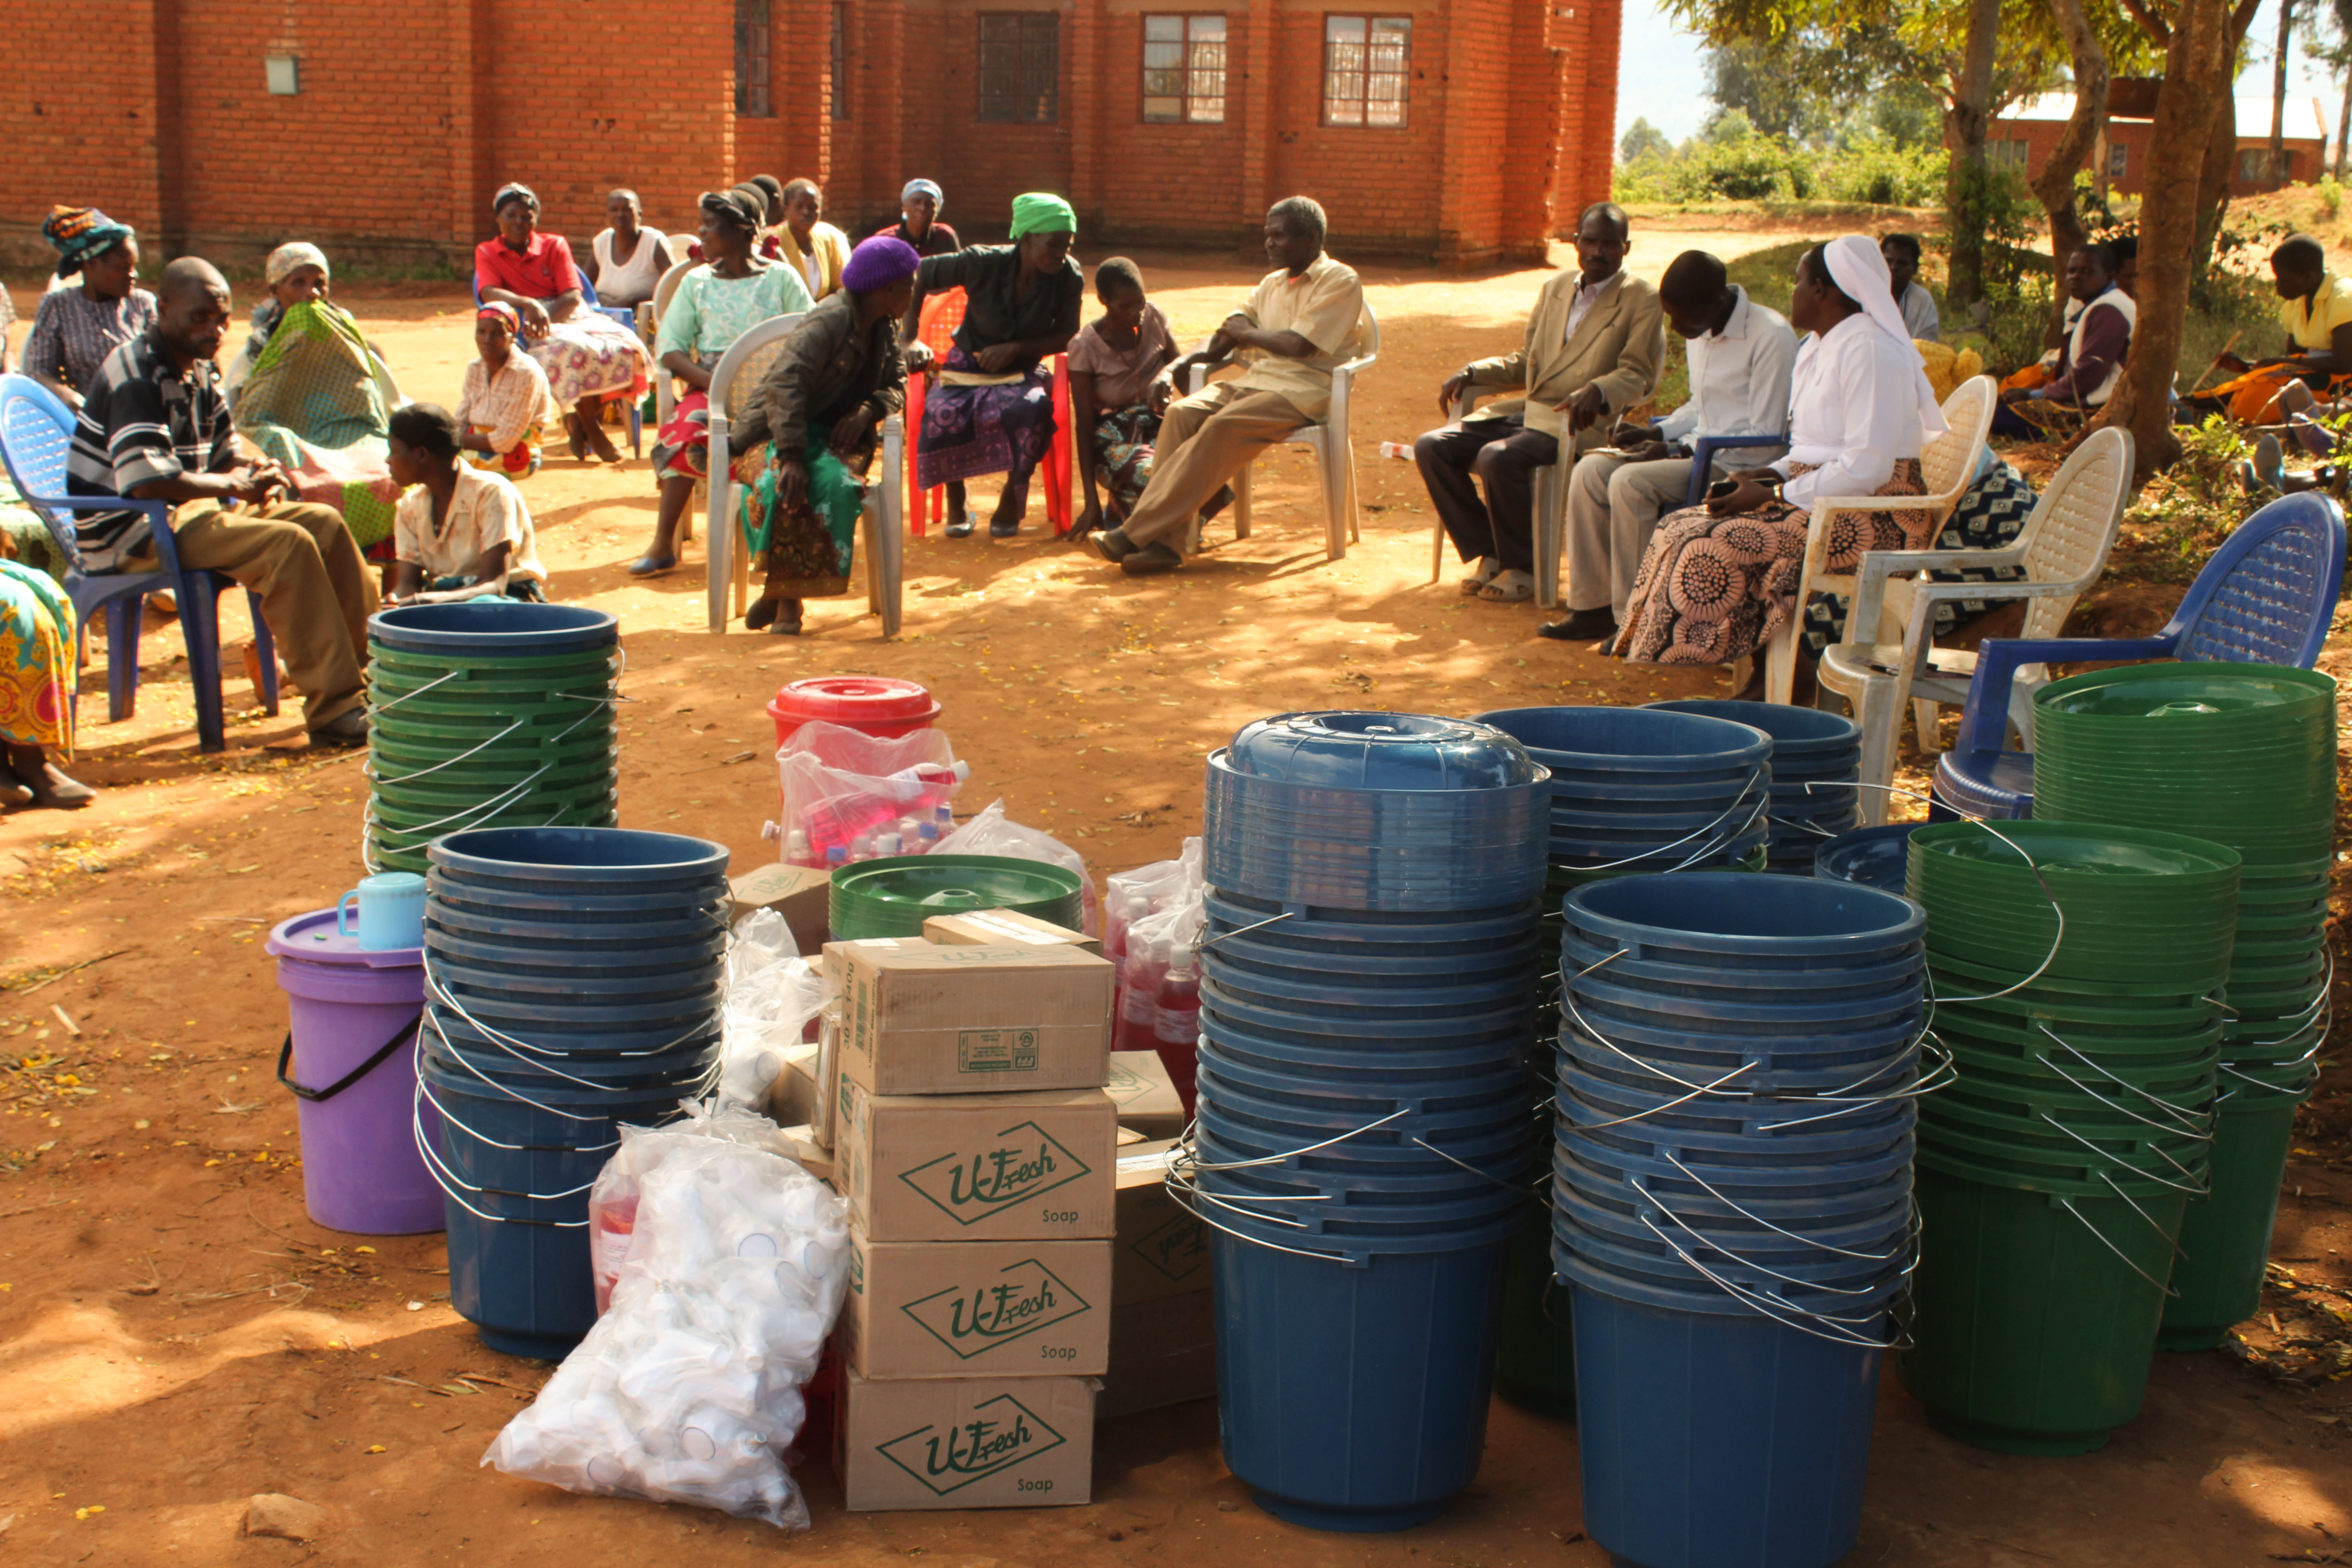 A successful grant proposal provides members of the HIV/AIDS support group in Malawi with sanitation materials